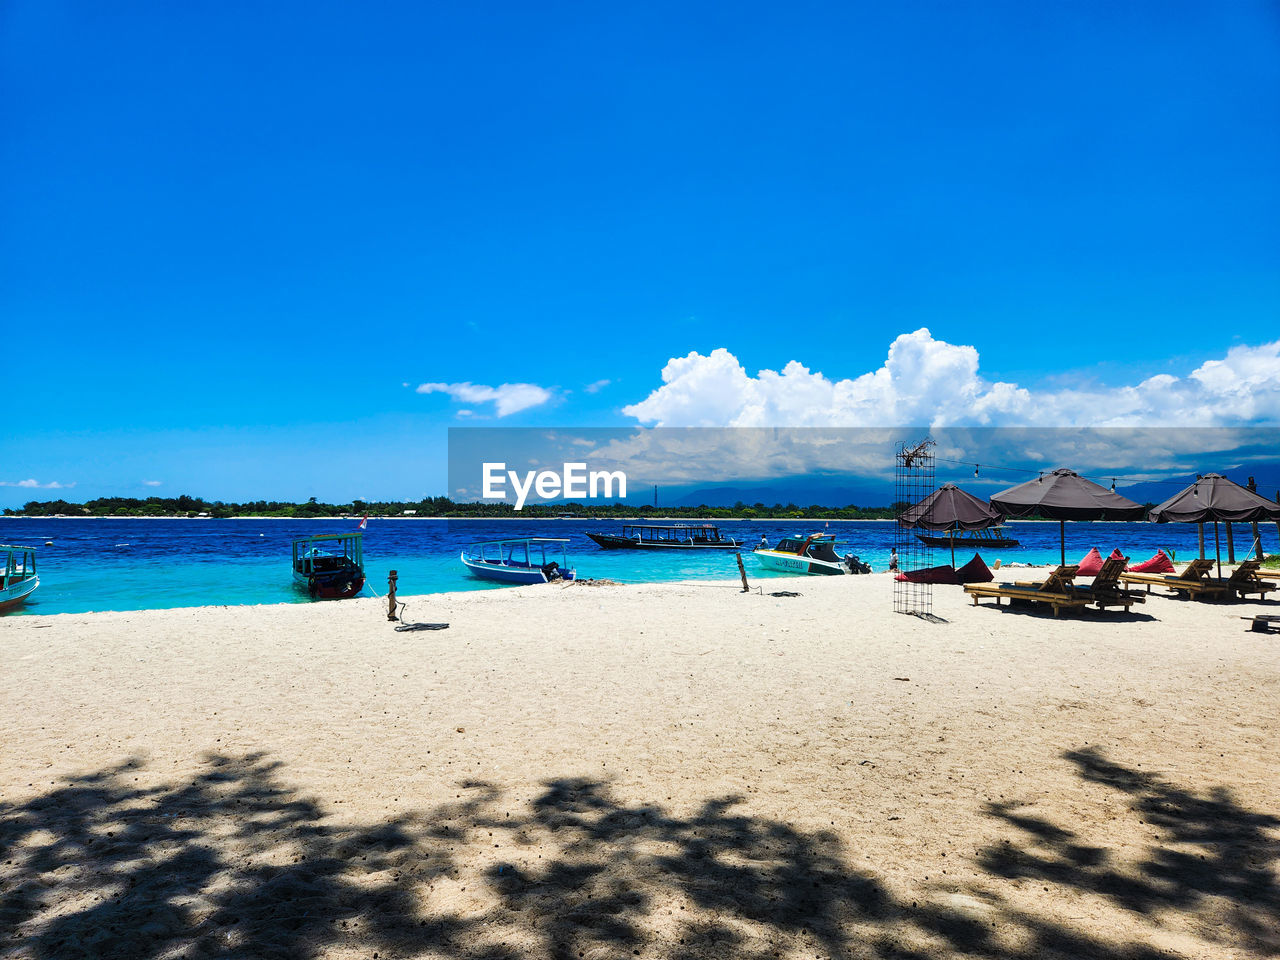 land, beach, sky, sea, water, sand, ocean, nature, body of water, blue, scenics - nature, holiday, travel destinations, vacation, trip, beauty in nature, shore, sunlight, travel, coast, tranquility, sunny, tranquil scene, horizon, summer, tourism, cloud, day, bay, outdoors, idyllic, clear sky, coastline, relaxation, no people, tropical climate, shadow, environment, horizon over water, landscape, chair, wave, island, nautical vessel, hut